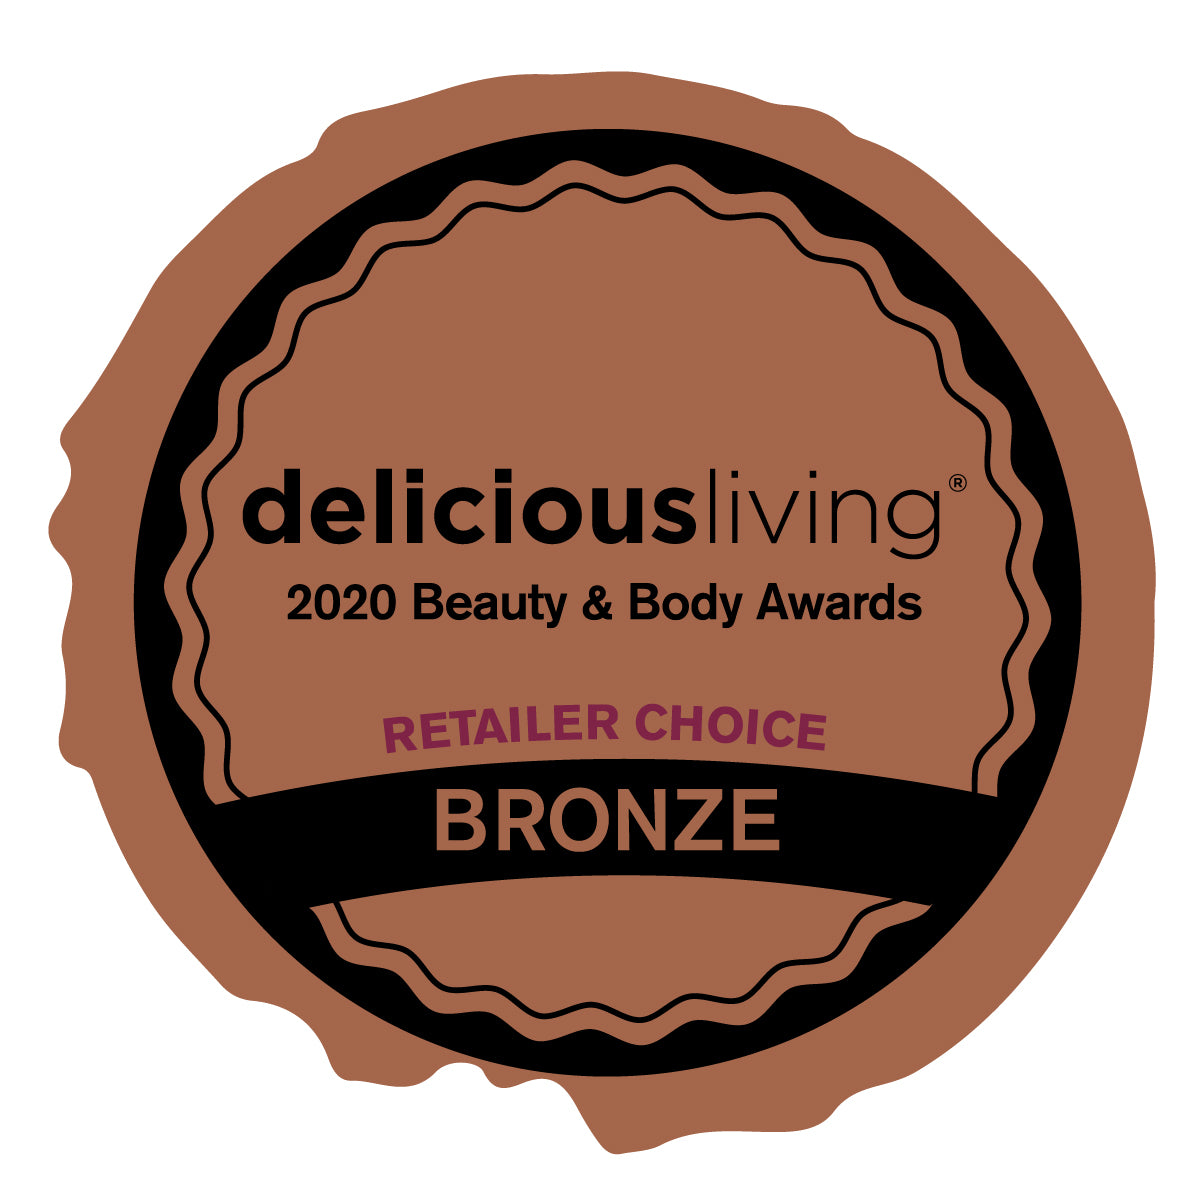 An exquisite badge adorned with the words "delicious living 2020 beauty and body awards".